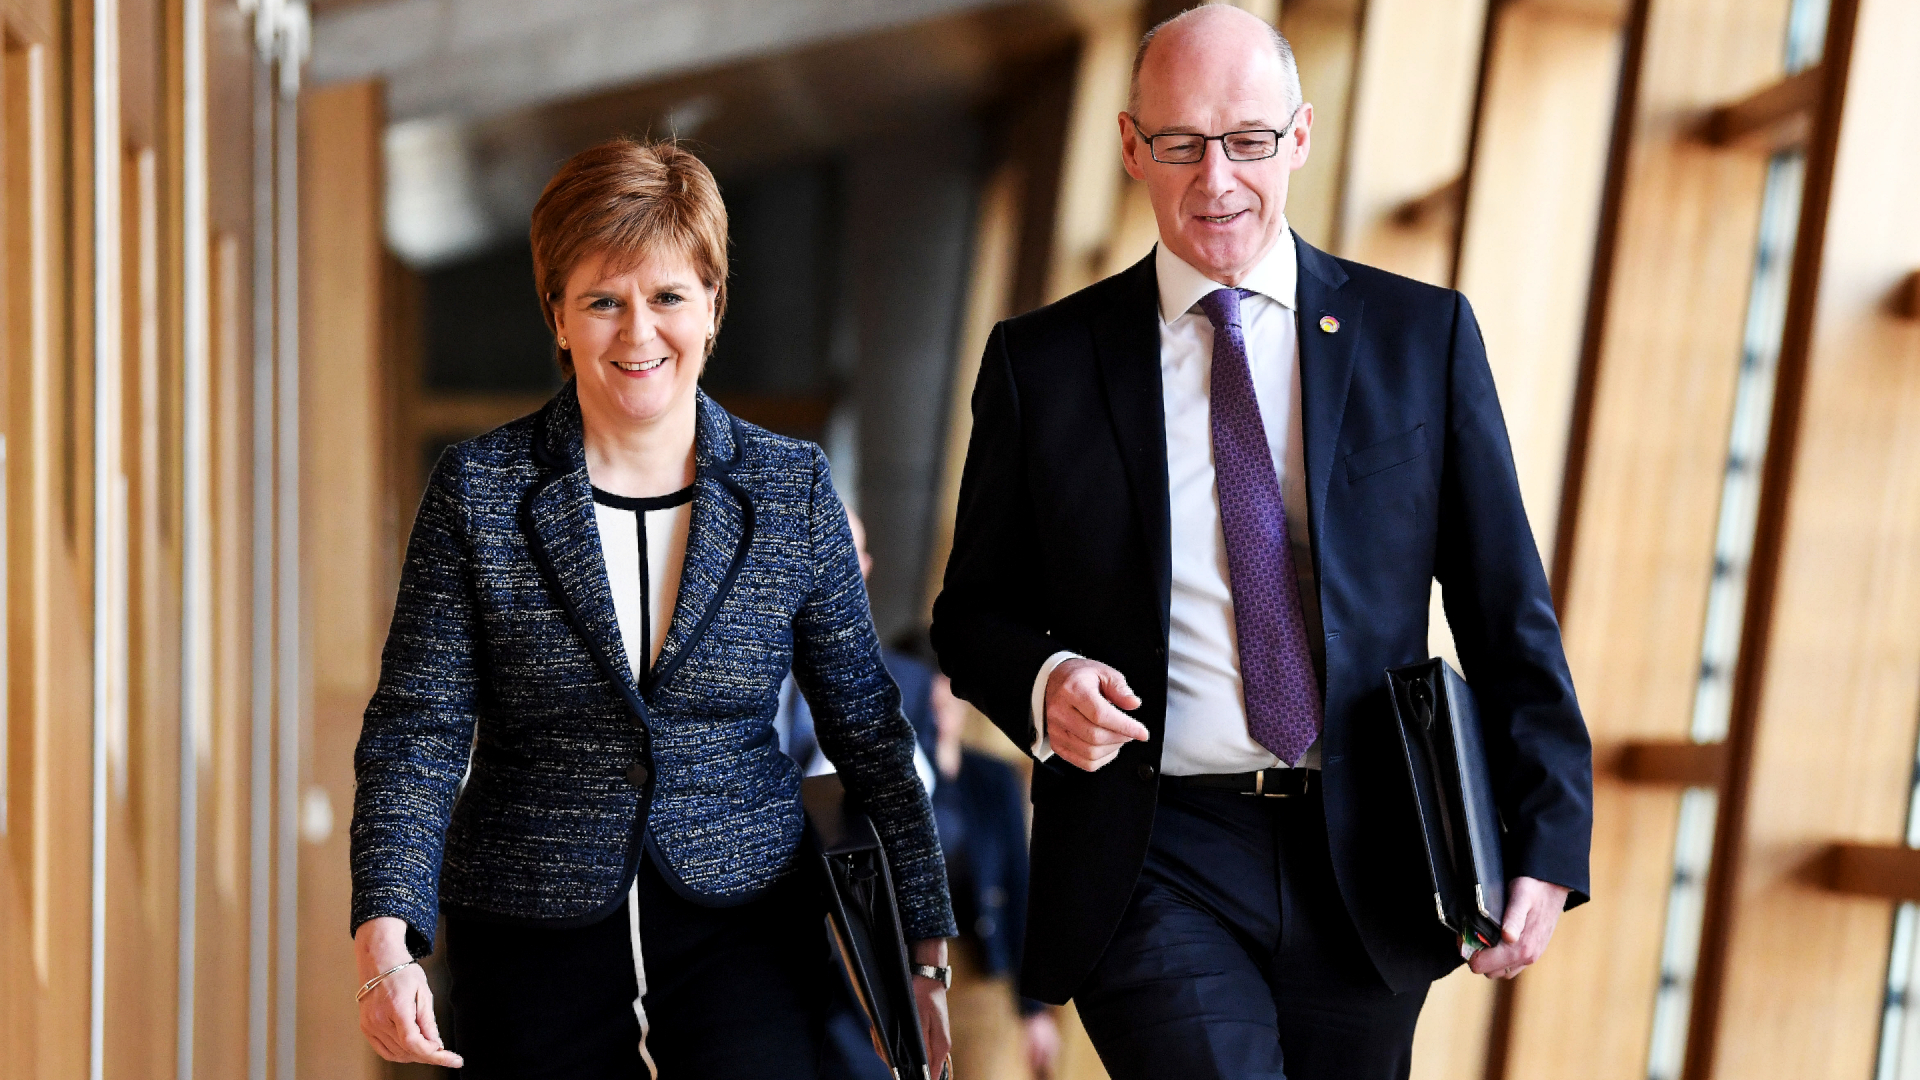 John Swinney was a close ally of Nicola Sturgeon when she was first minister.